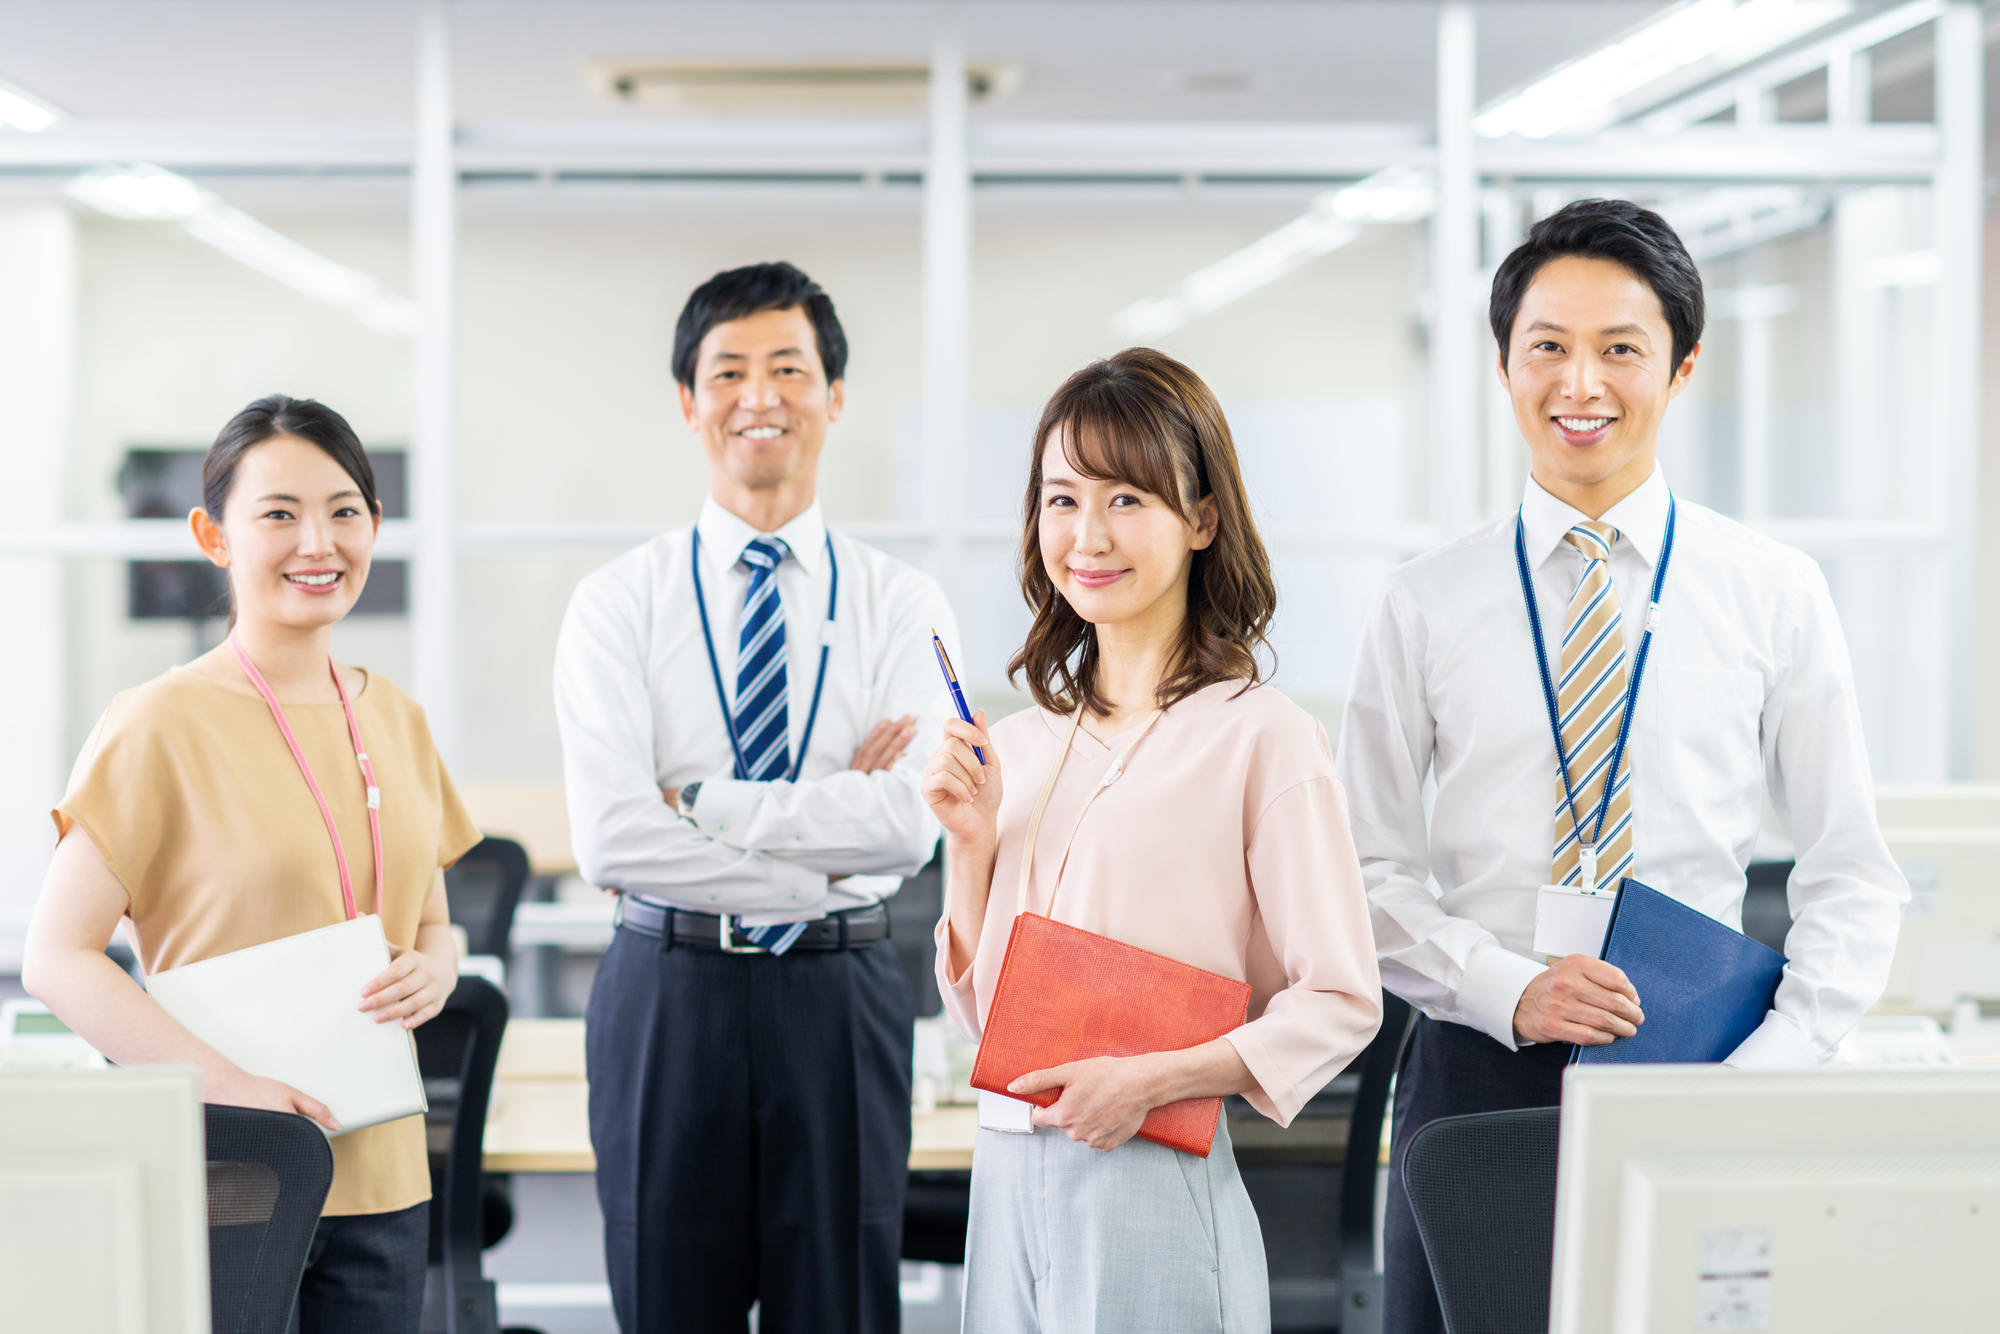 7 Surprising Things About Japanese Work Culture, as Told by